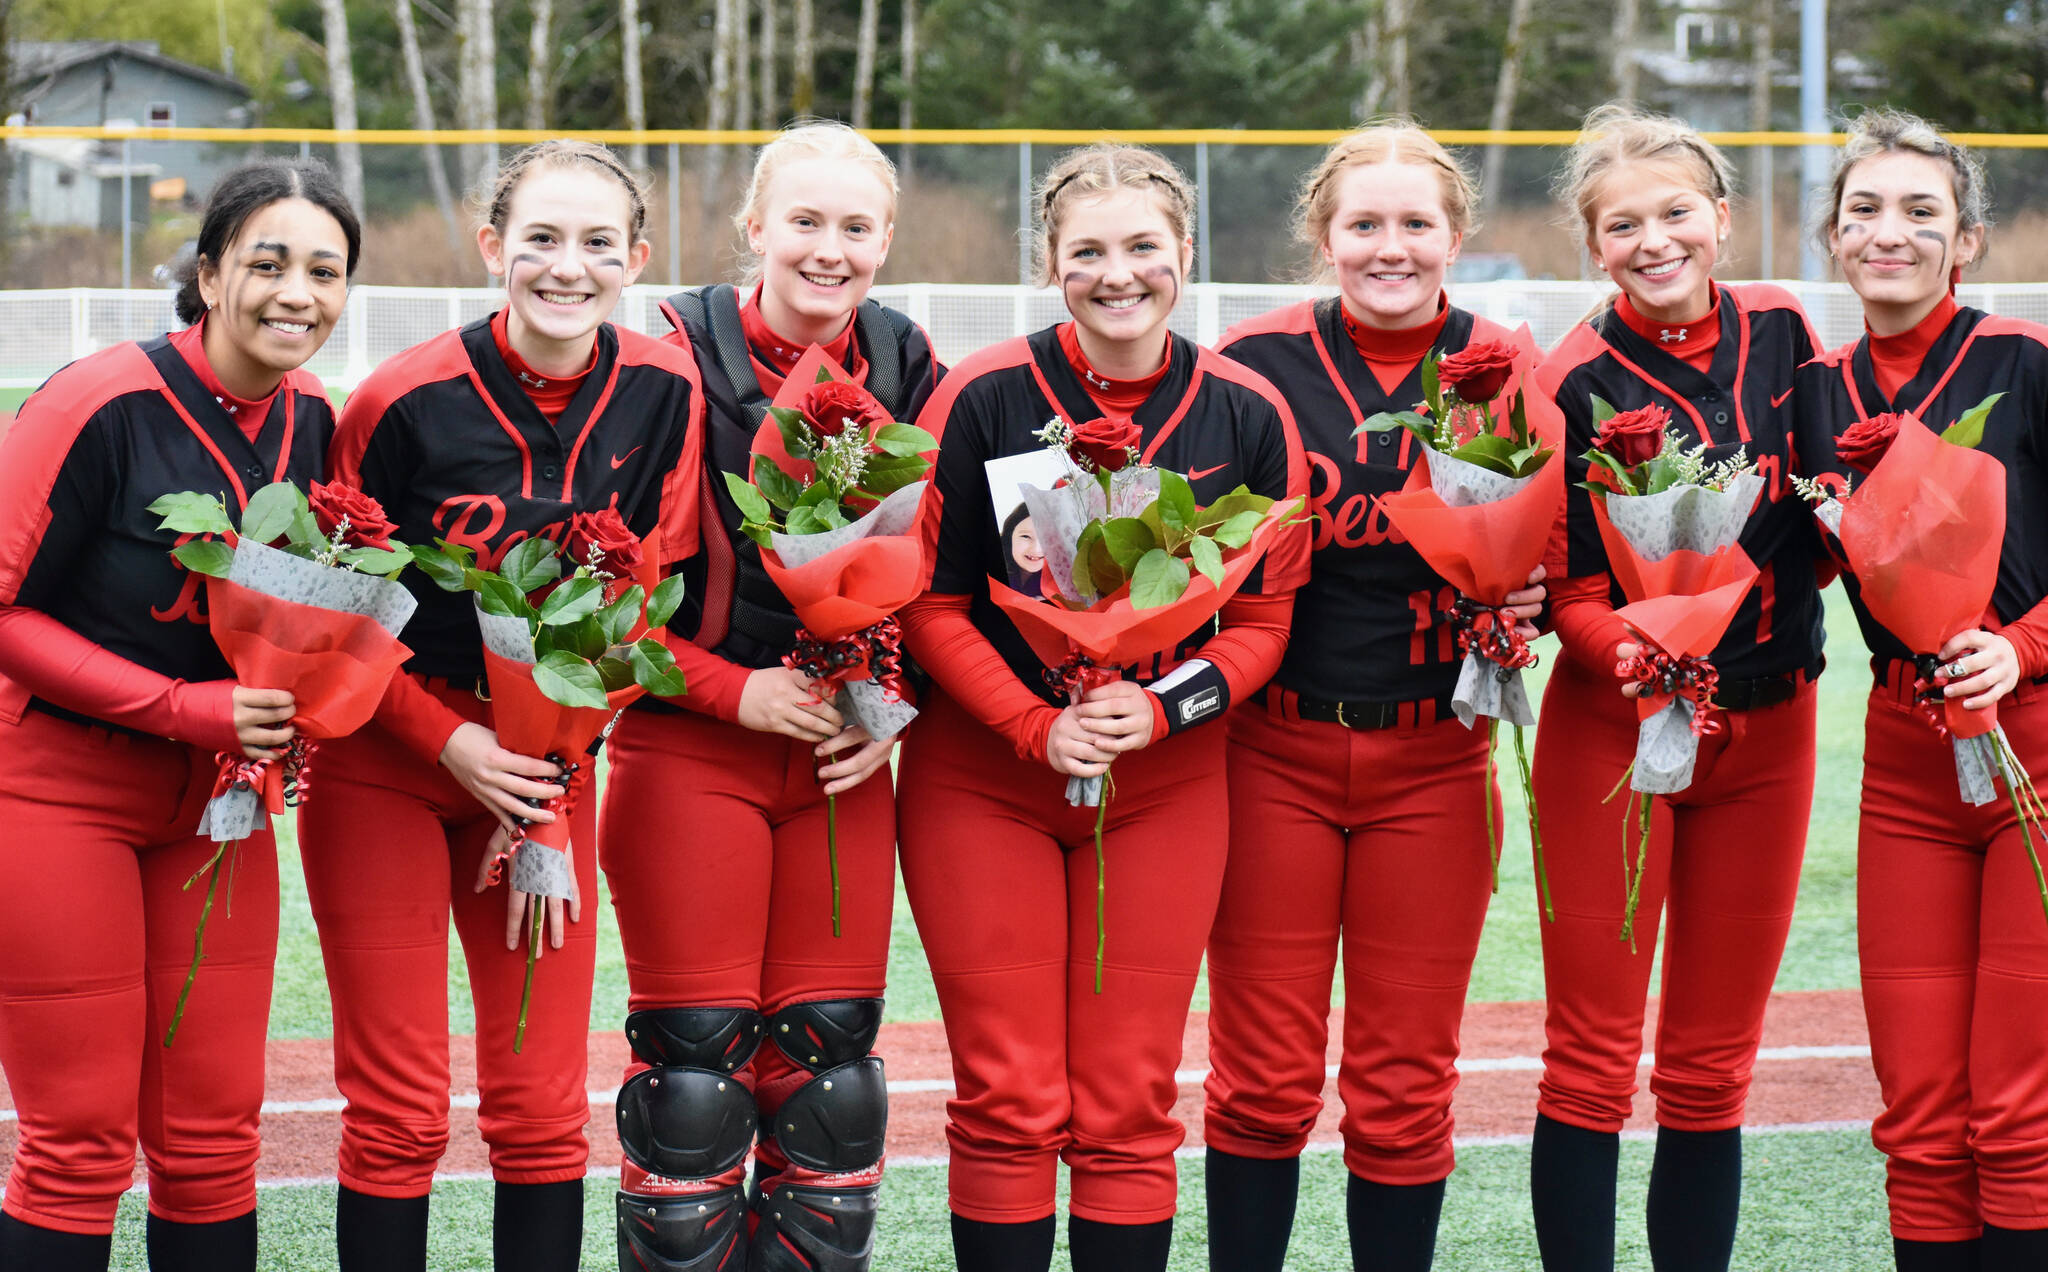 This file photo shows Juneau-Douglas High School: Yadaa.at Kalé Crimson Bears senior softball players Amira Andrews, Carlynn Casperson, Anna Dale, Gloria Bixby, Mariah Schauwecker, Zoey Billings and Bailey Hansen. JDHS plays in a semifinal against Sitka at 6 p.m. Friday in the Region V Tournament on Sitka’s Moller Field. (Courtesy Photo / JDHS Softball)